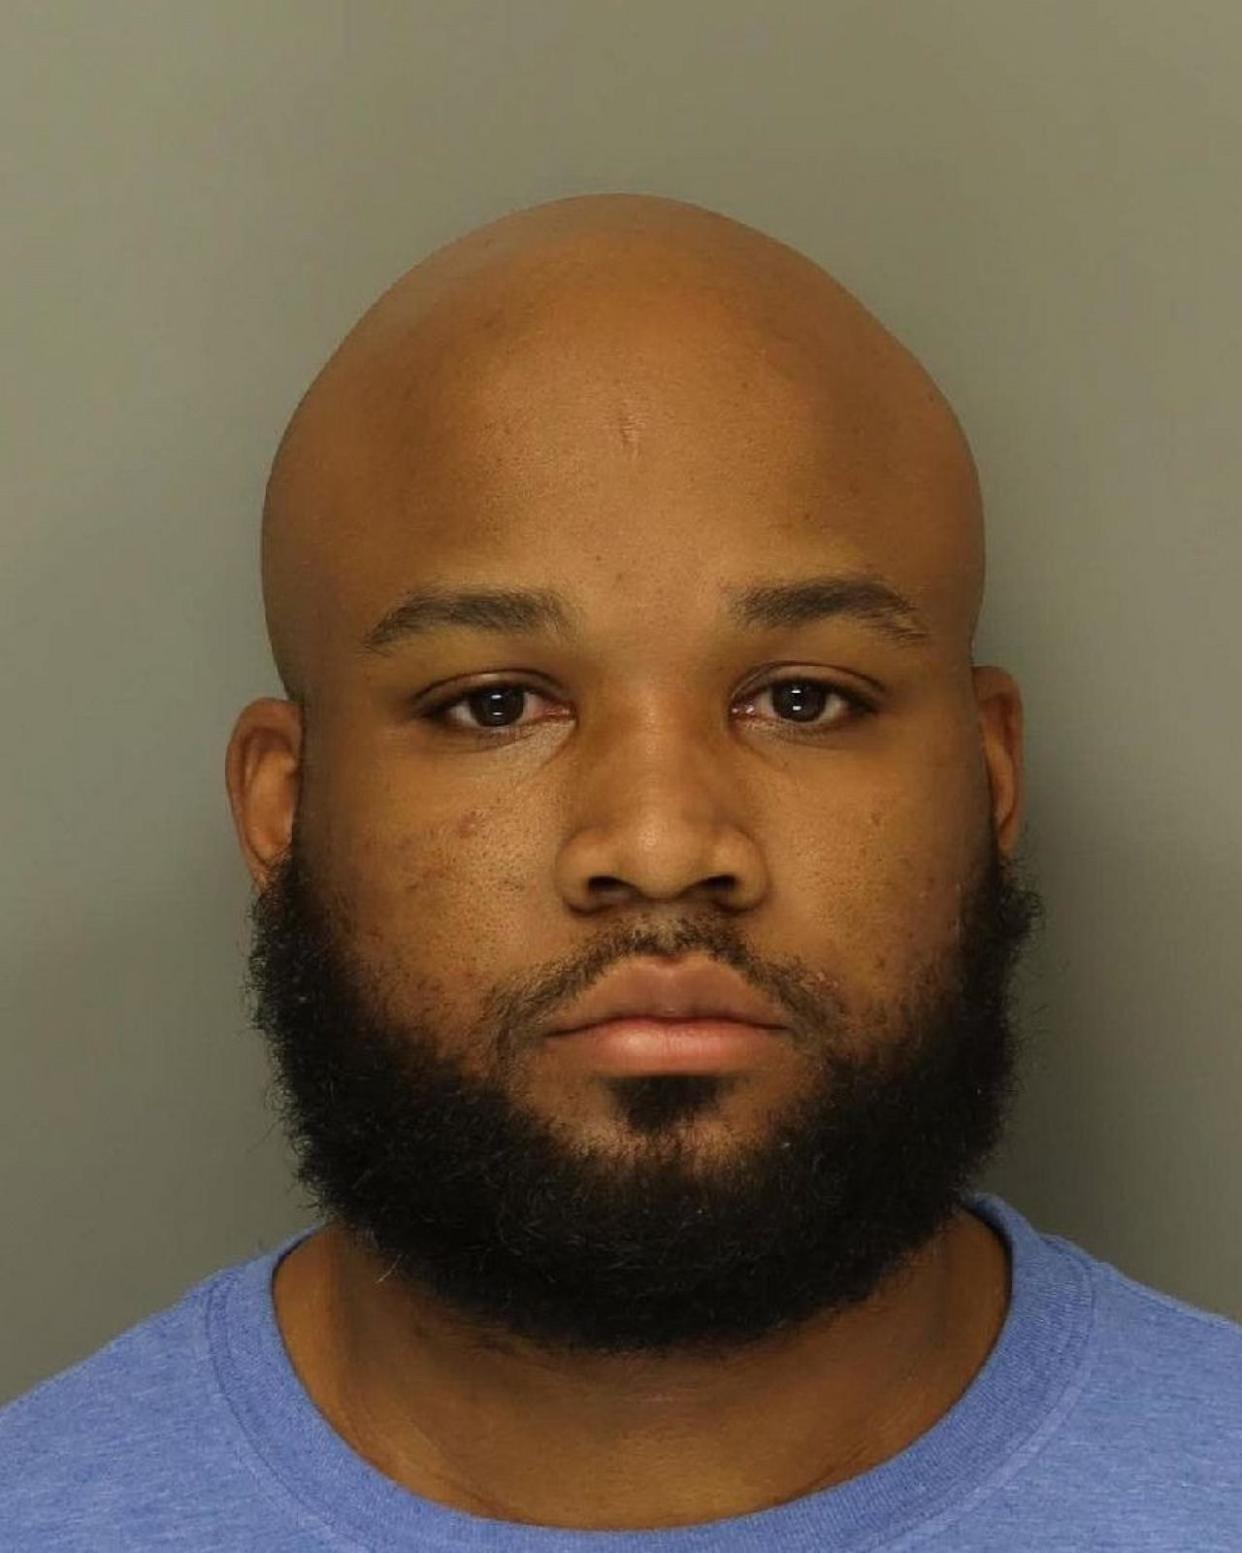 PHOTO: Dazhon Darien is shown in this booking photo released by the Baltimore County Police Department. (Baltimore County Police Department)